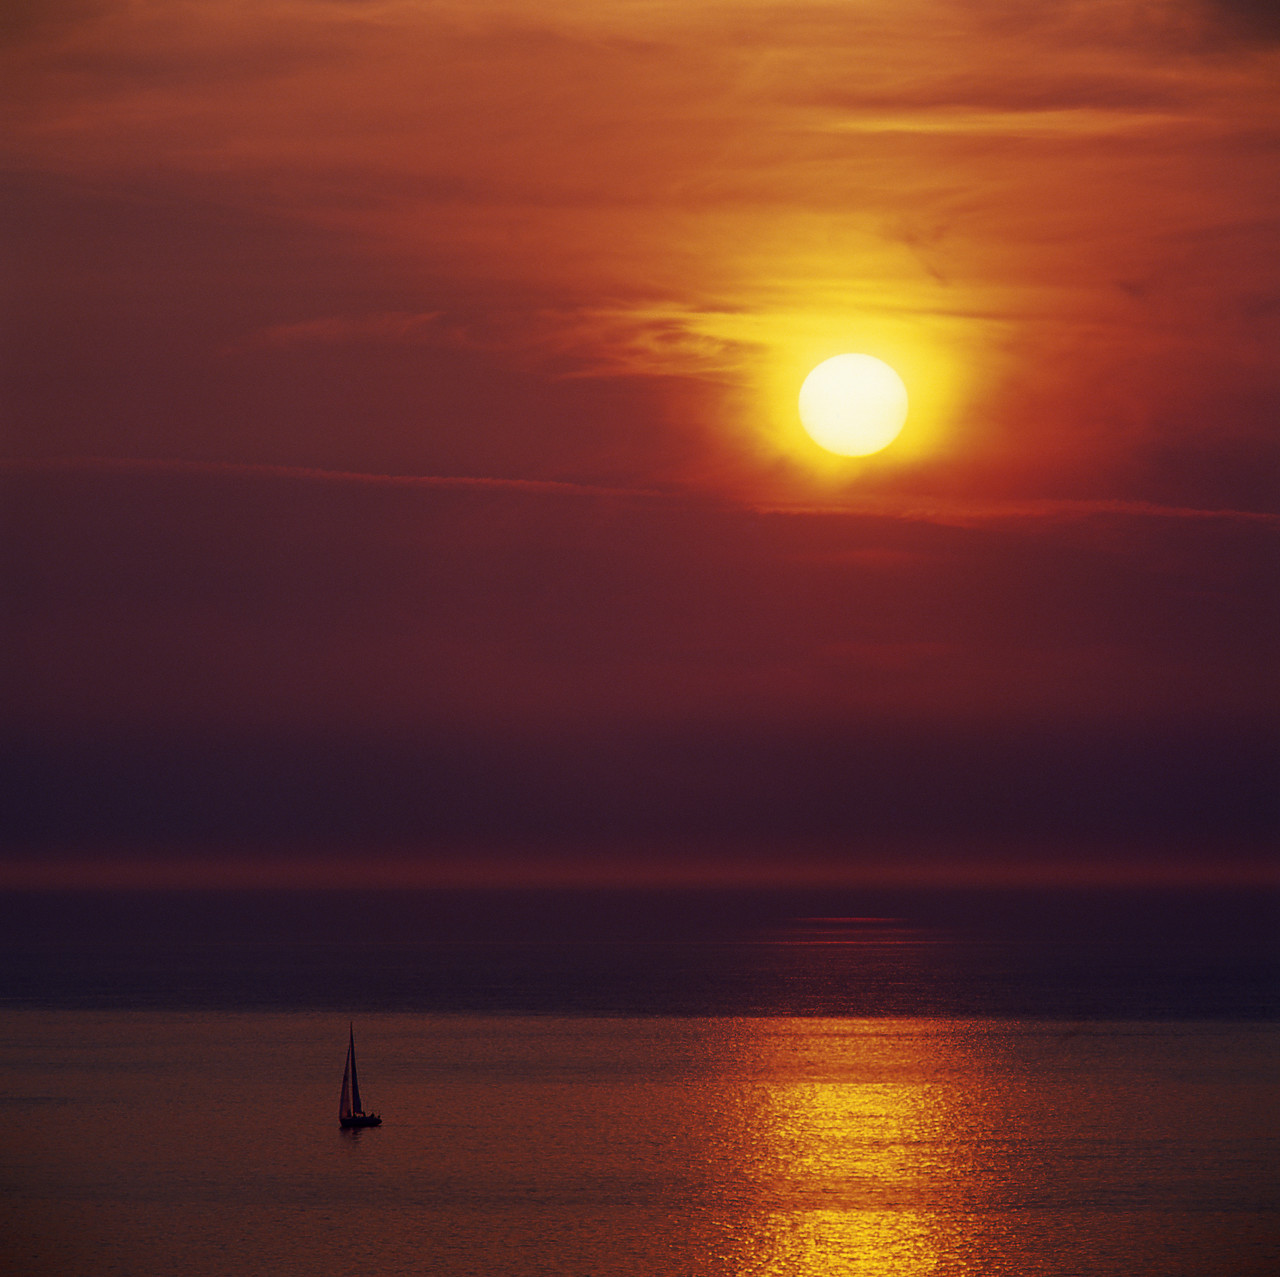 #970428 - Sailboat at Sunset, Jersey, Channel Islands